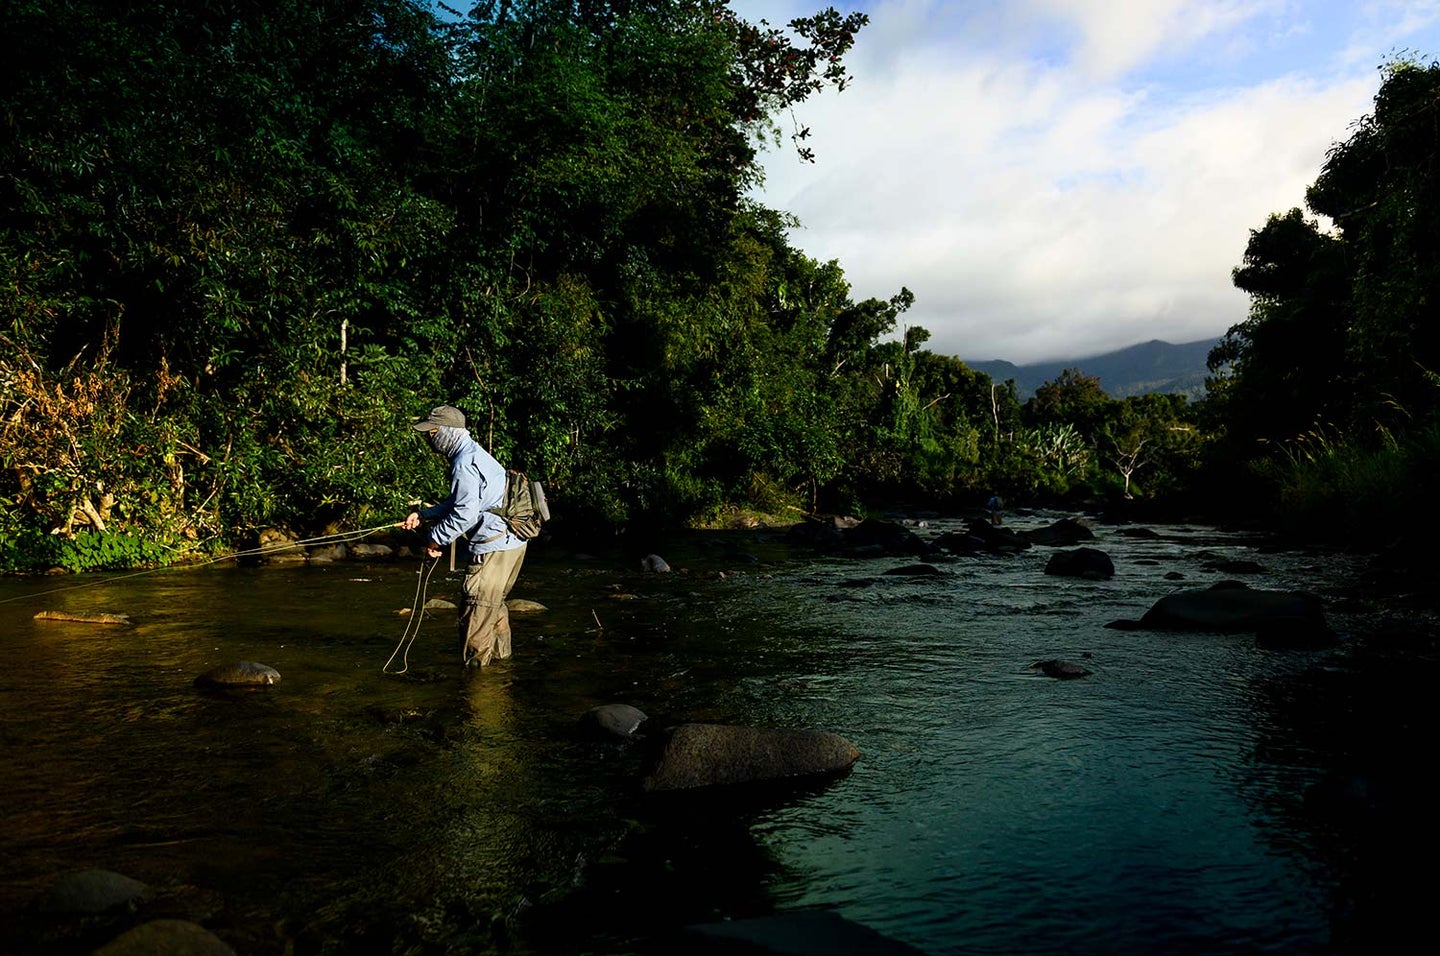 An angler fishing in a Puerto Rico river.